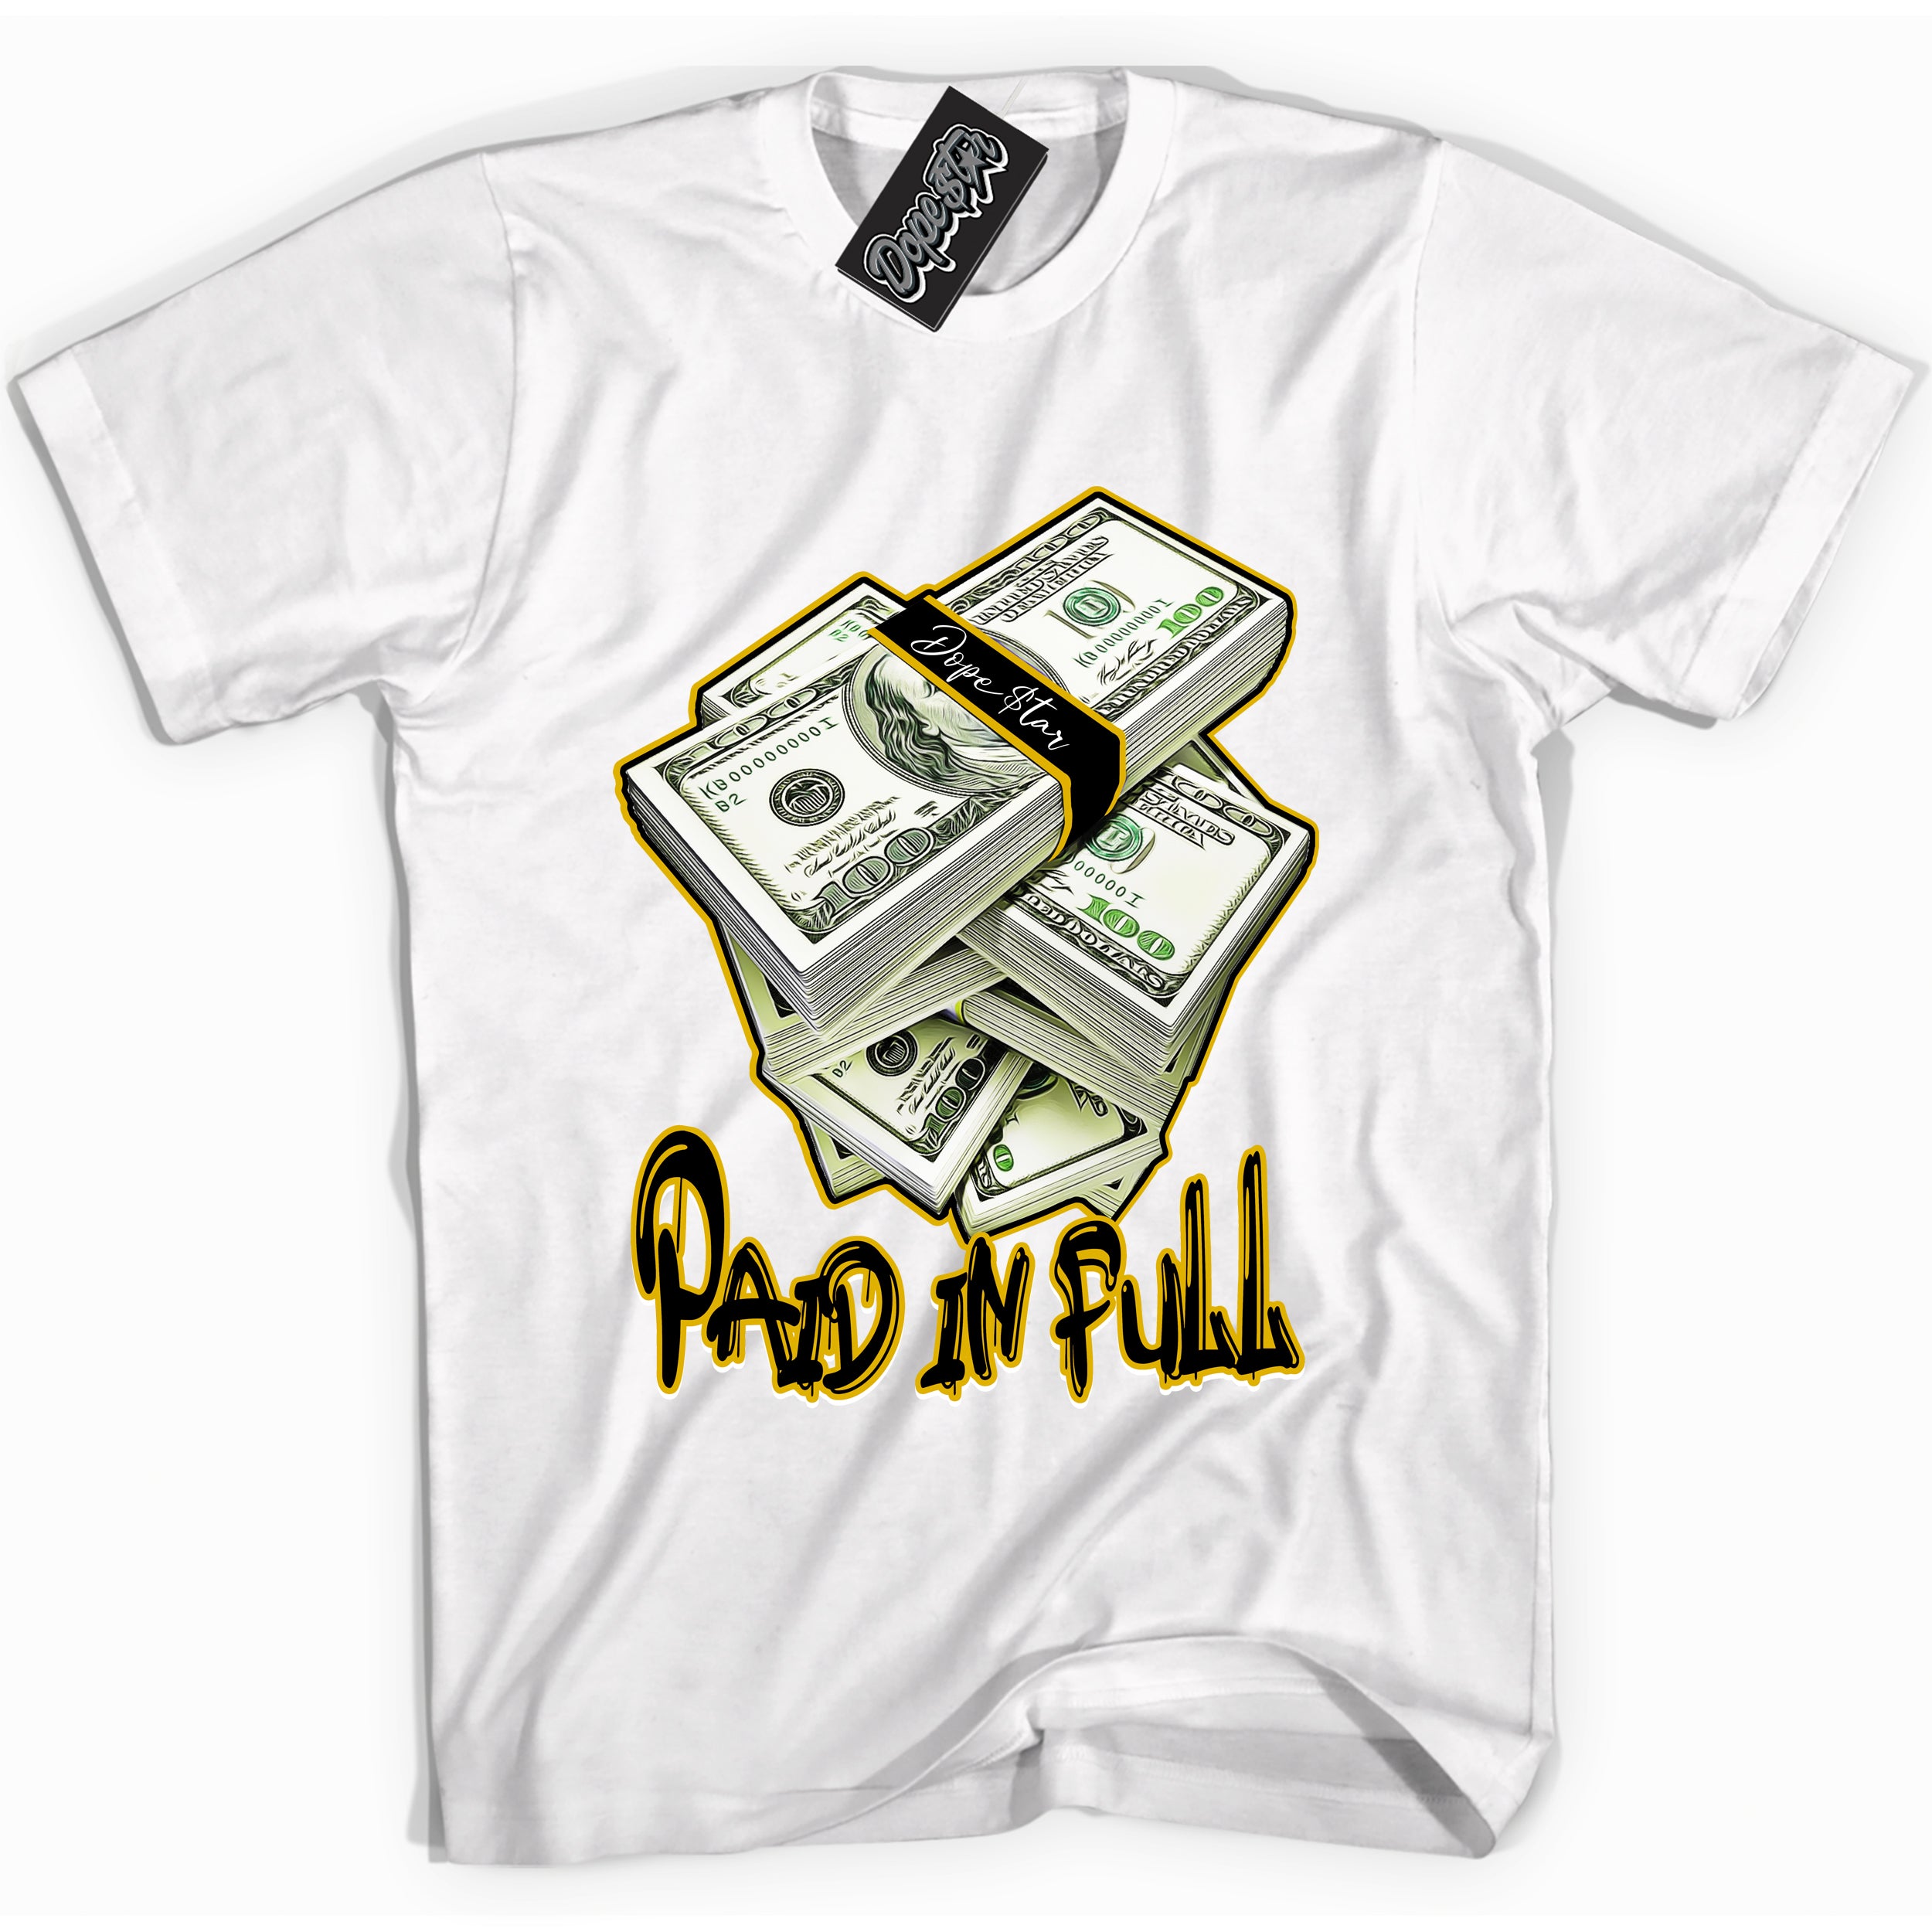 Cool White Shirt with “ Paid In Full” design that perfectly matches Yellow Ochre 6s Sneakers.